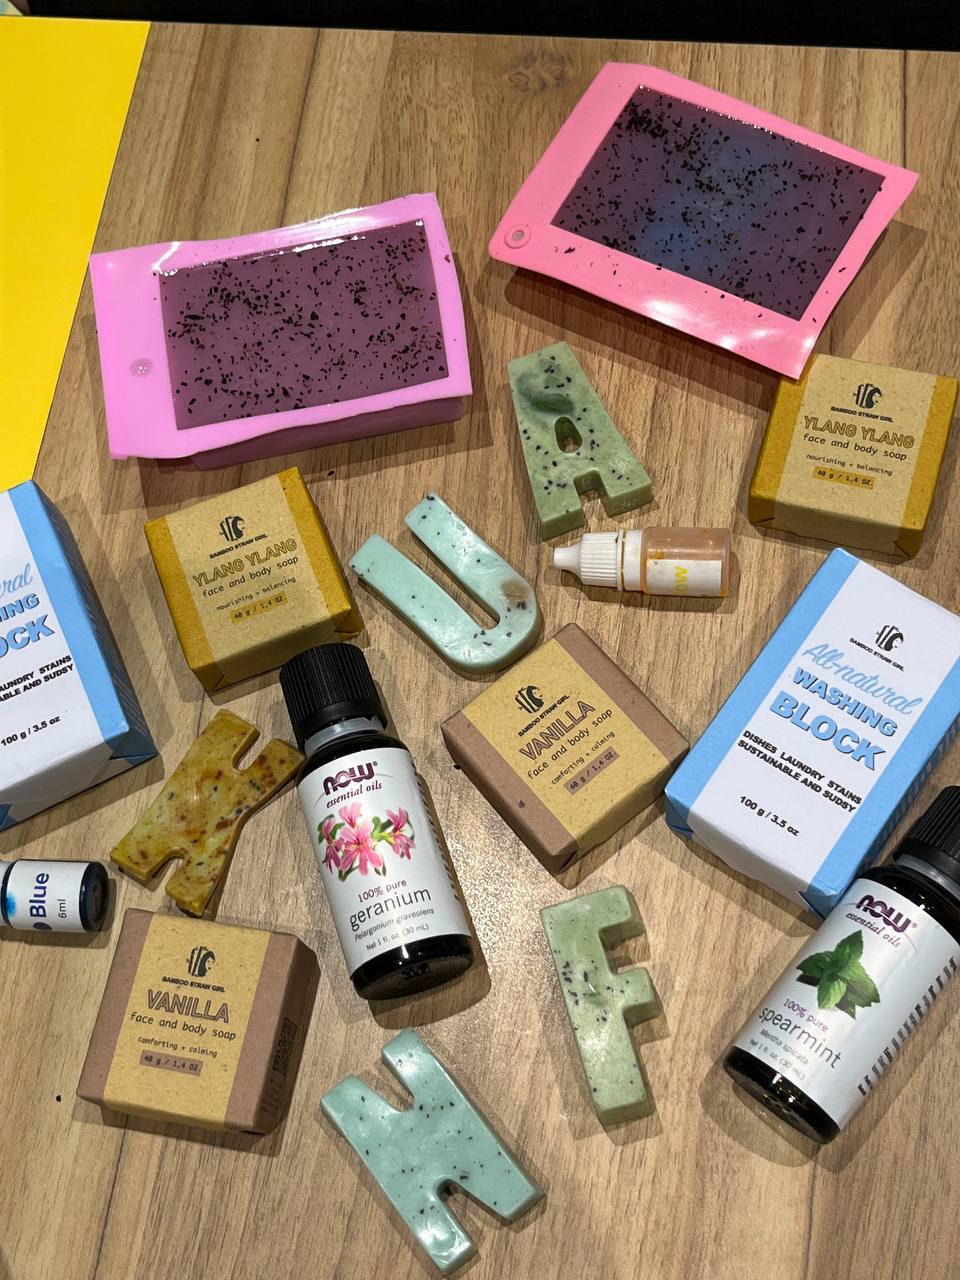 Featuring the handmade face and body soaps and natural washing blocks we received from Ms Lam! 